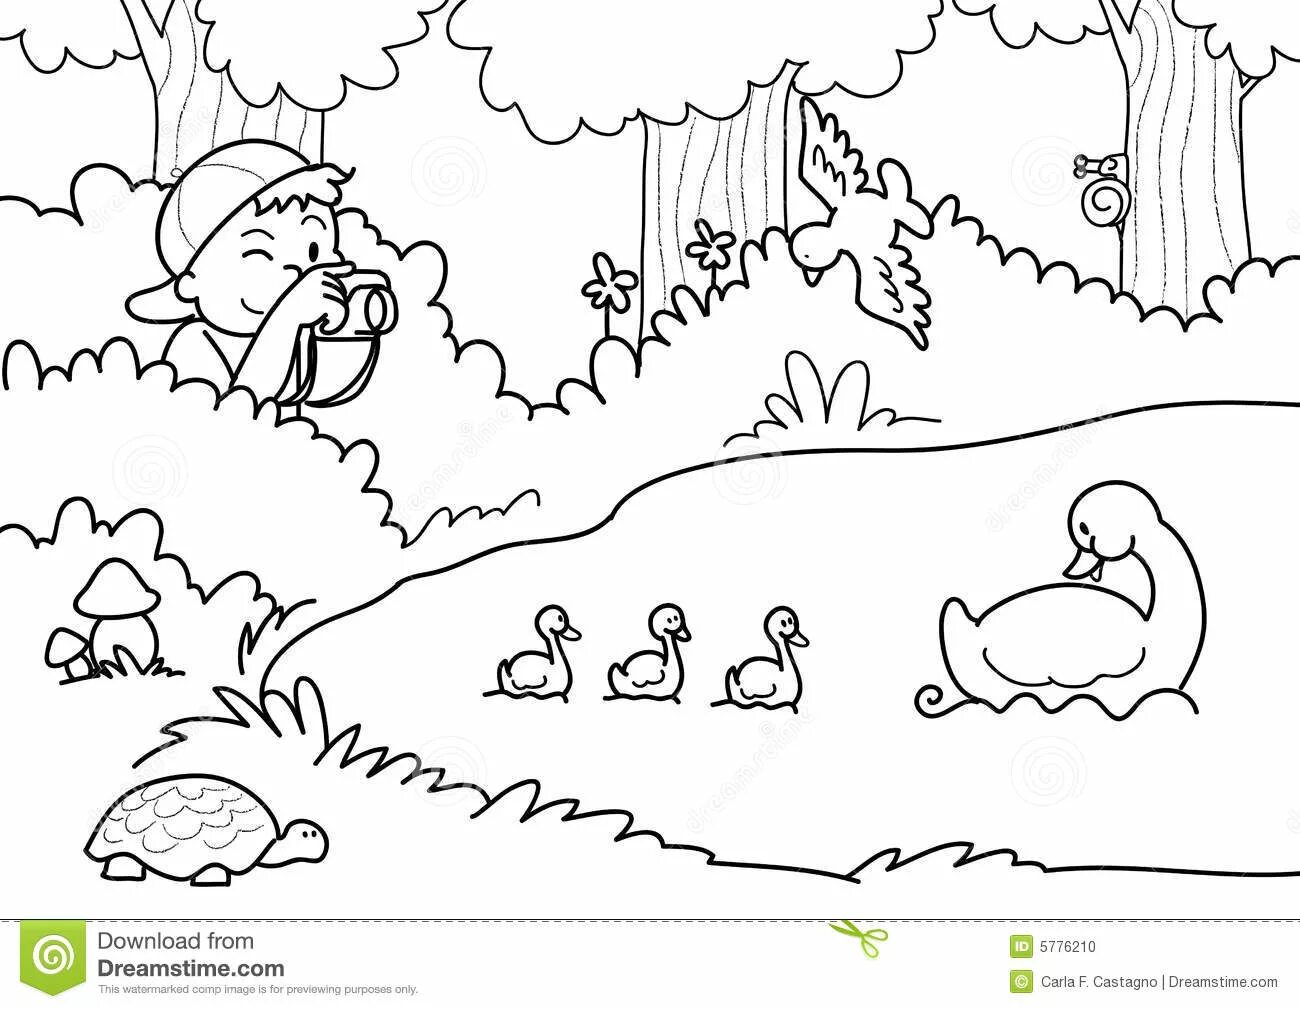 Coloring poster lovely save nature